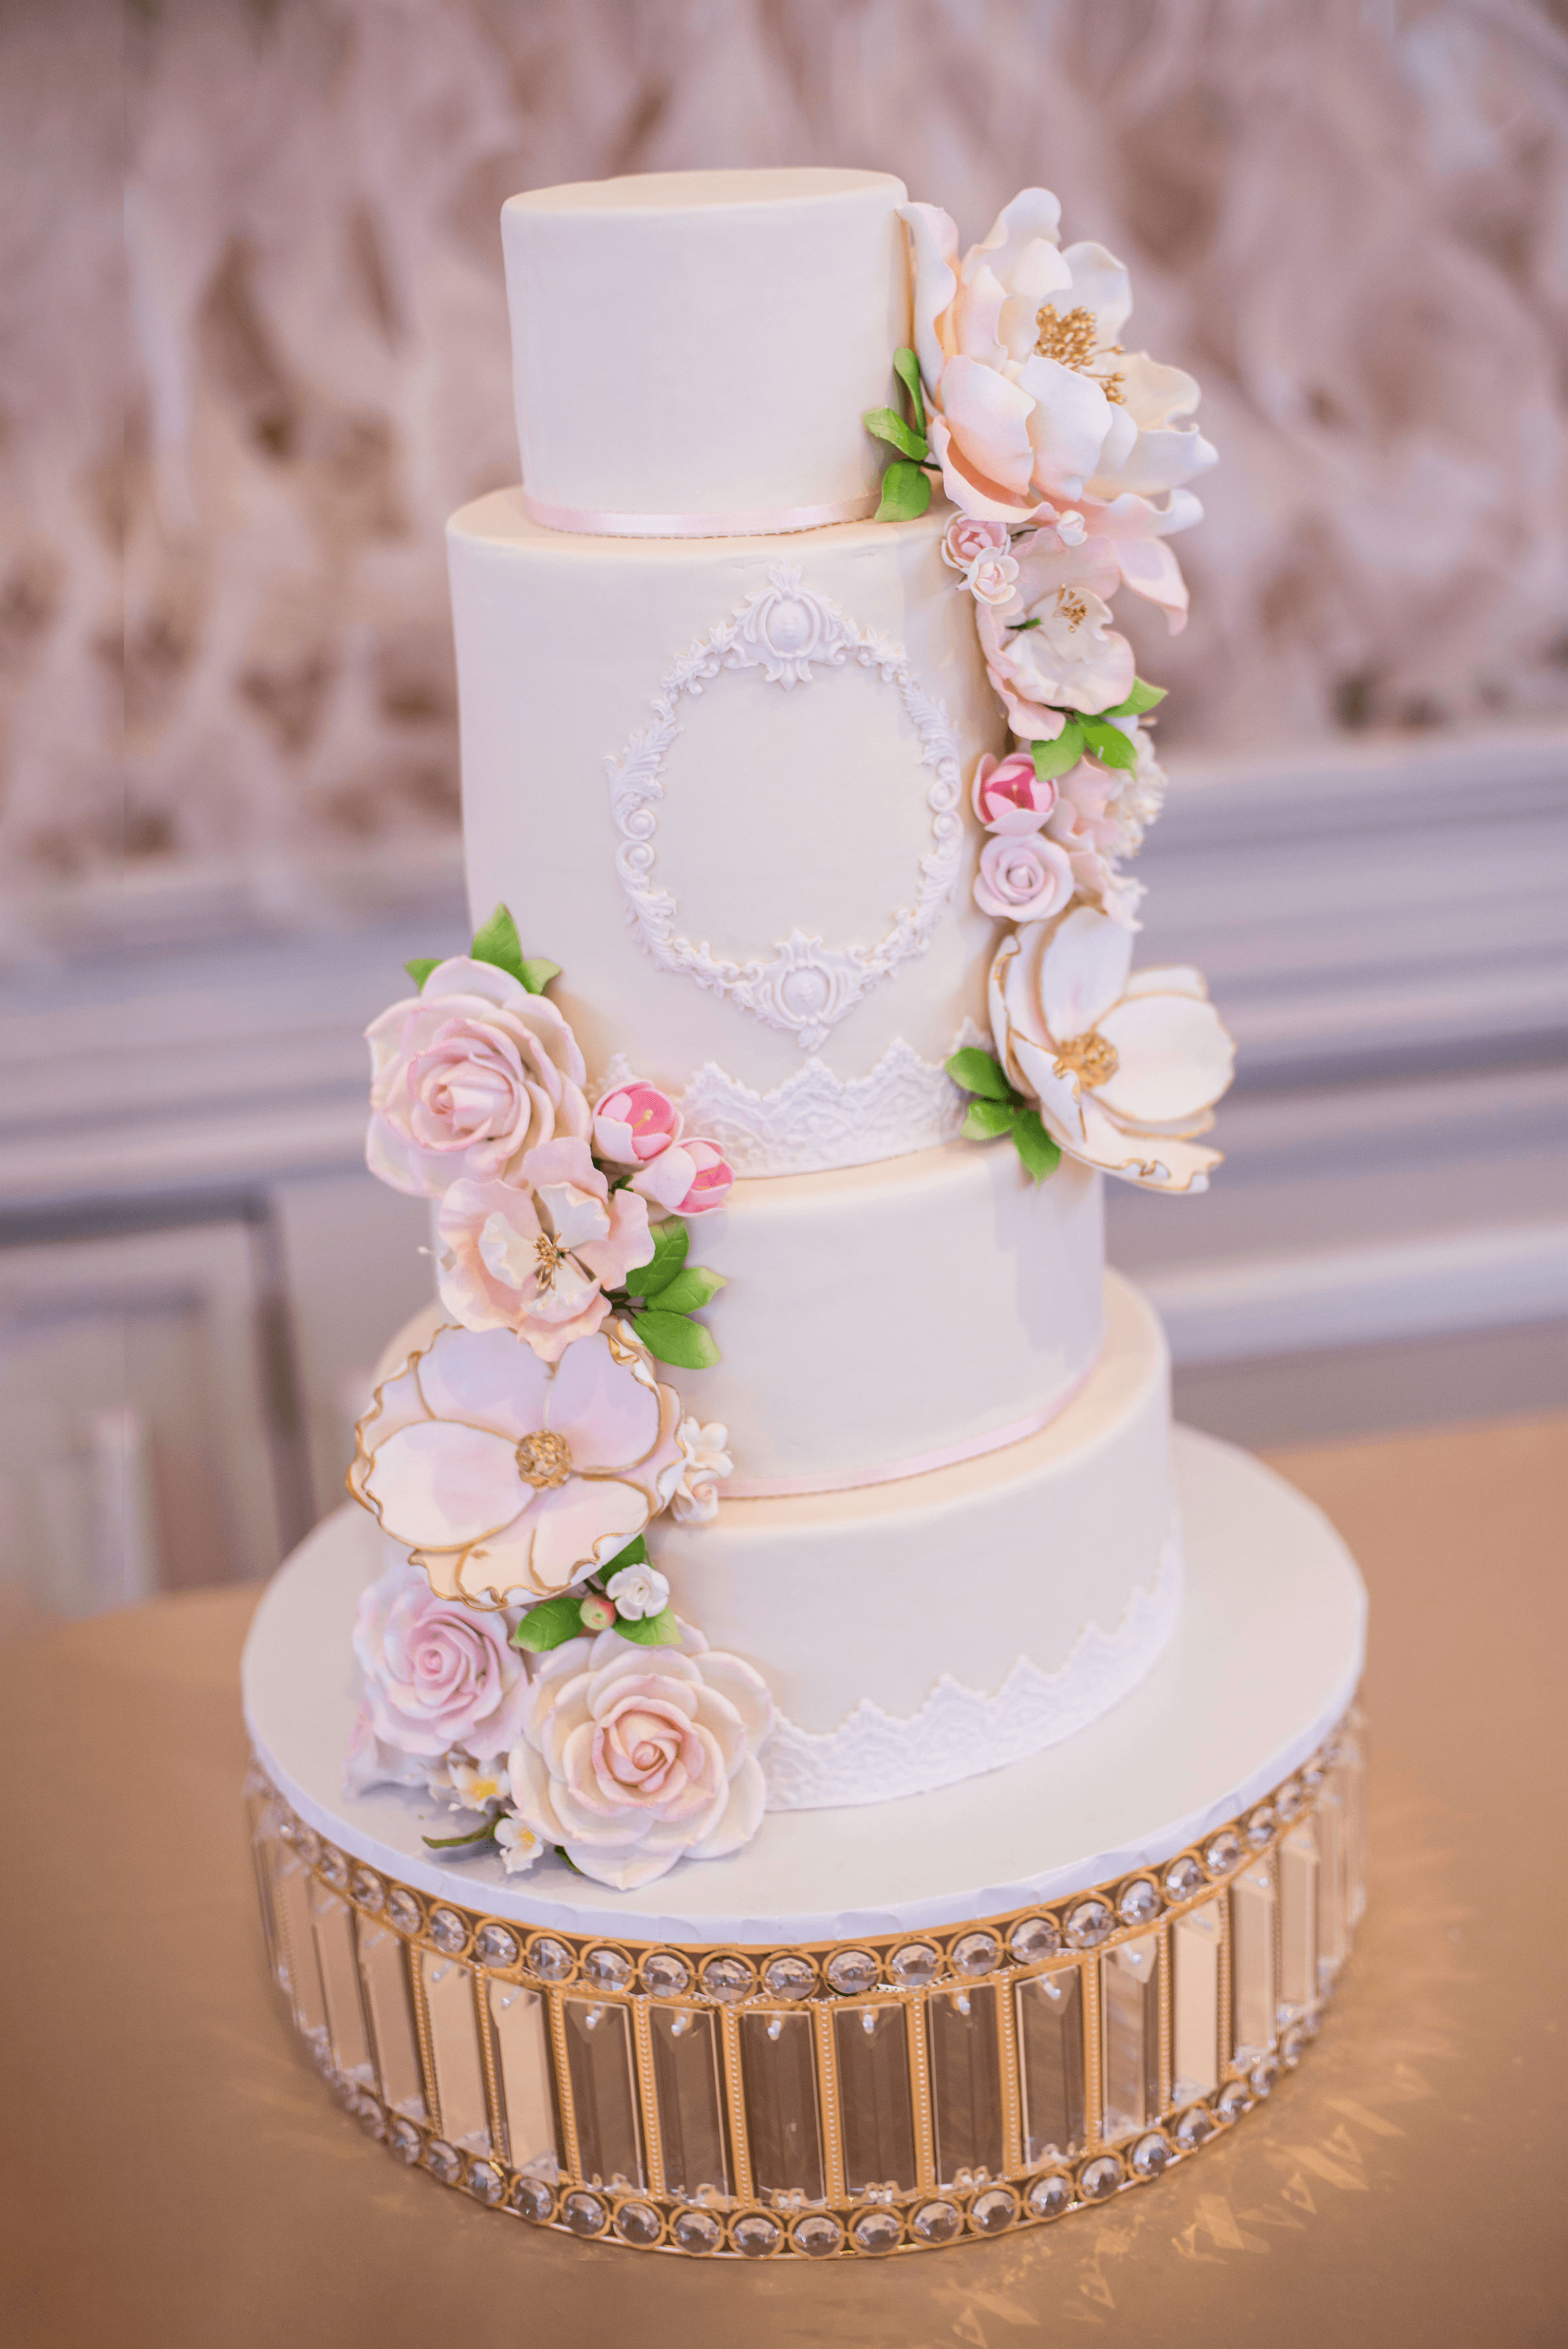 A white, 4-tier wedding cake decorated with flowers.